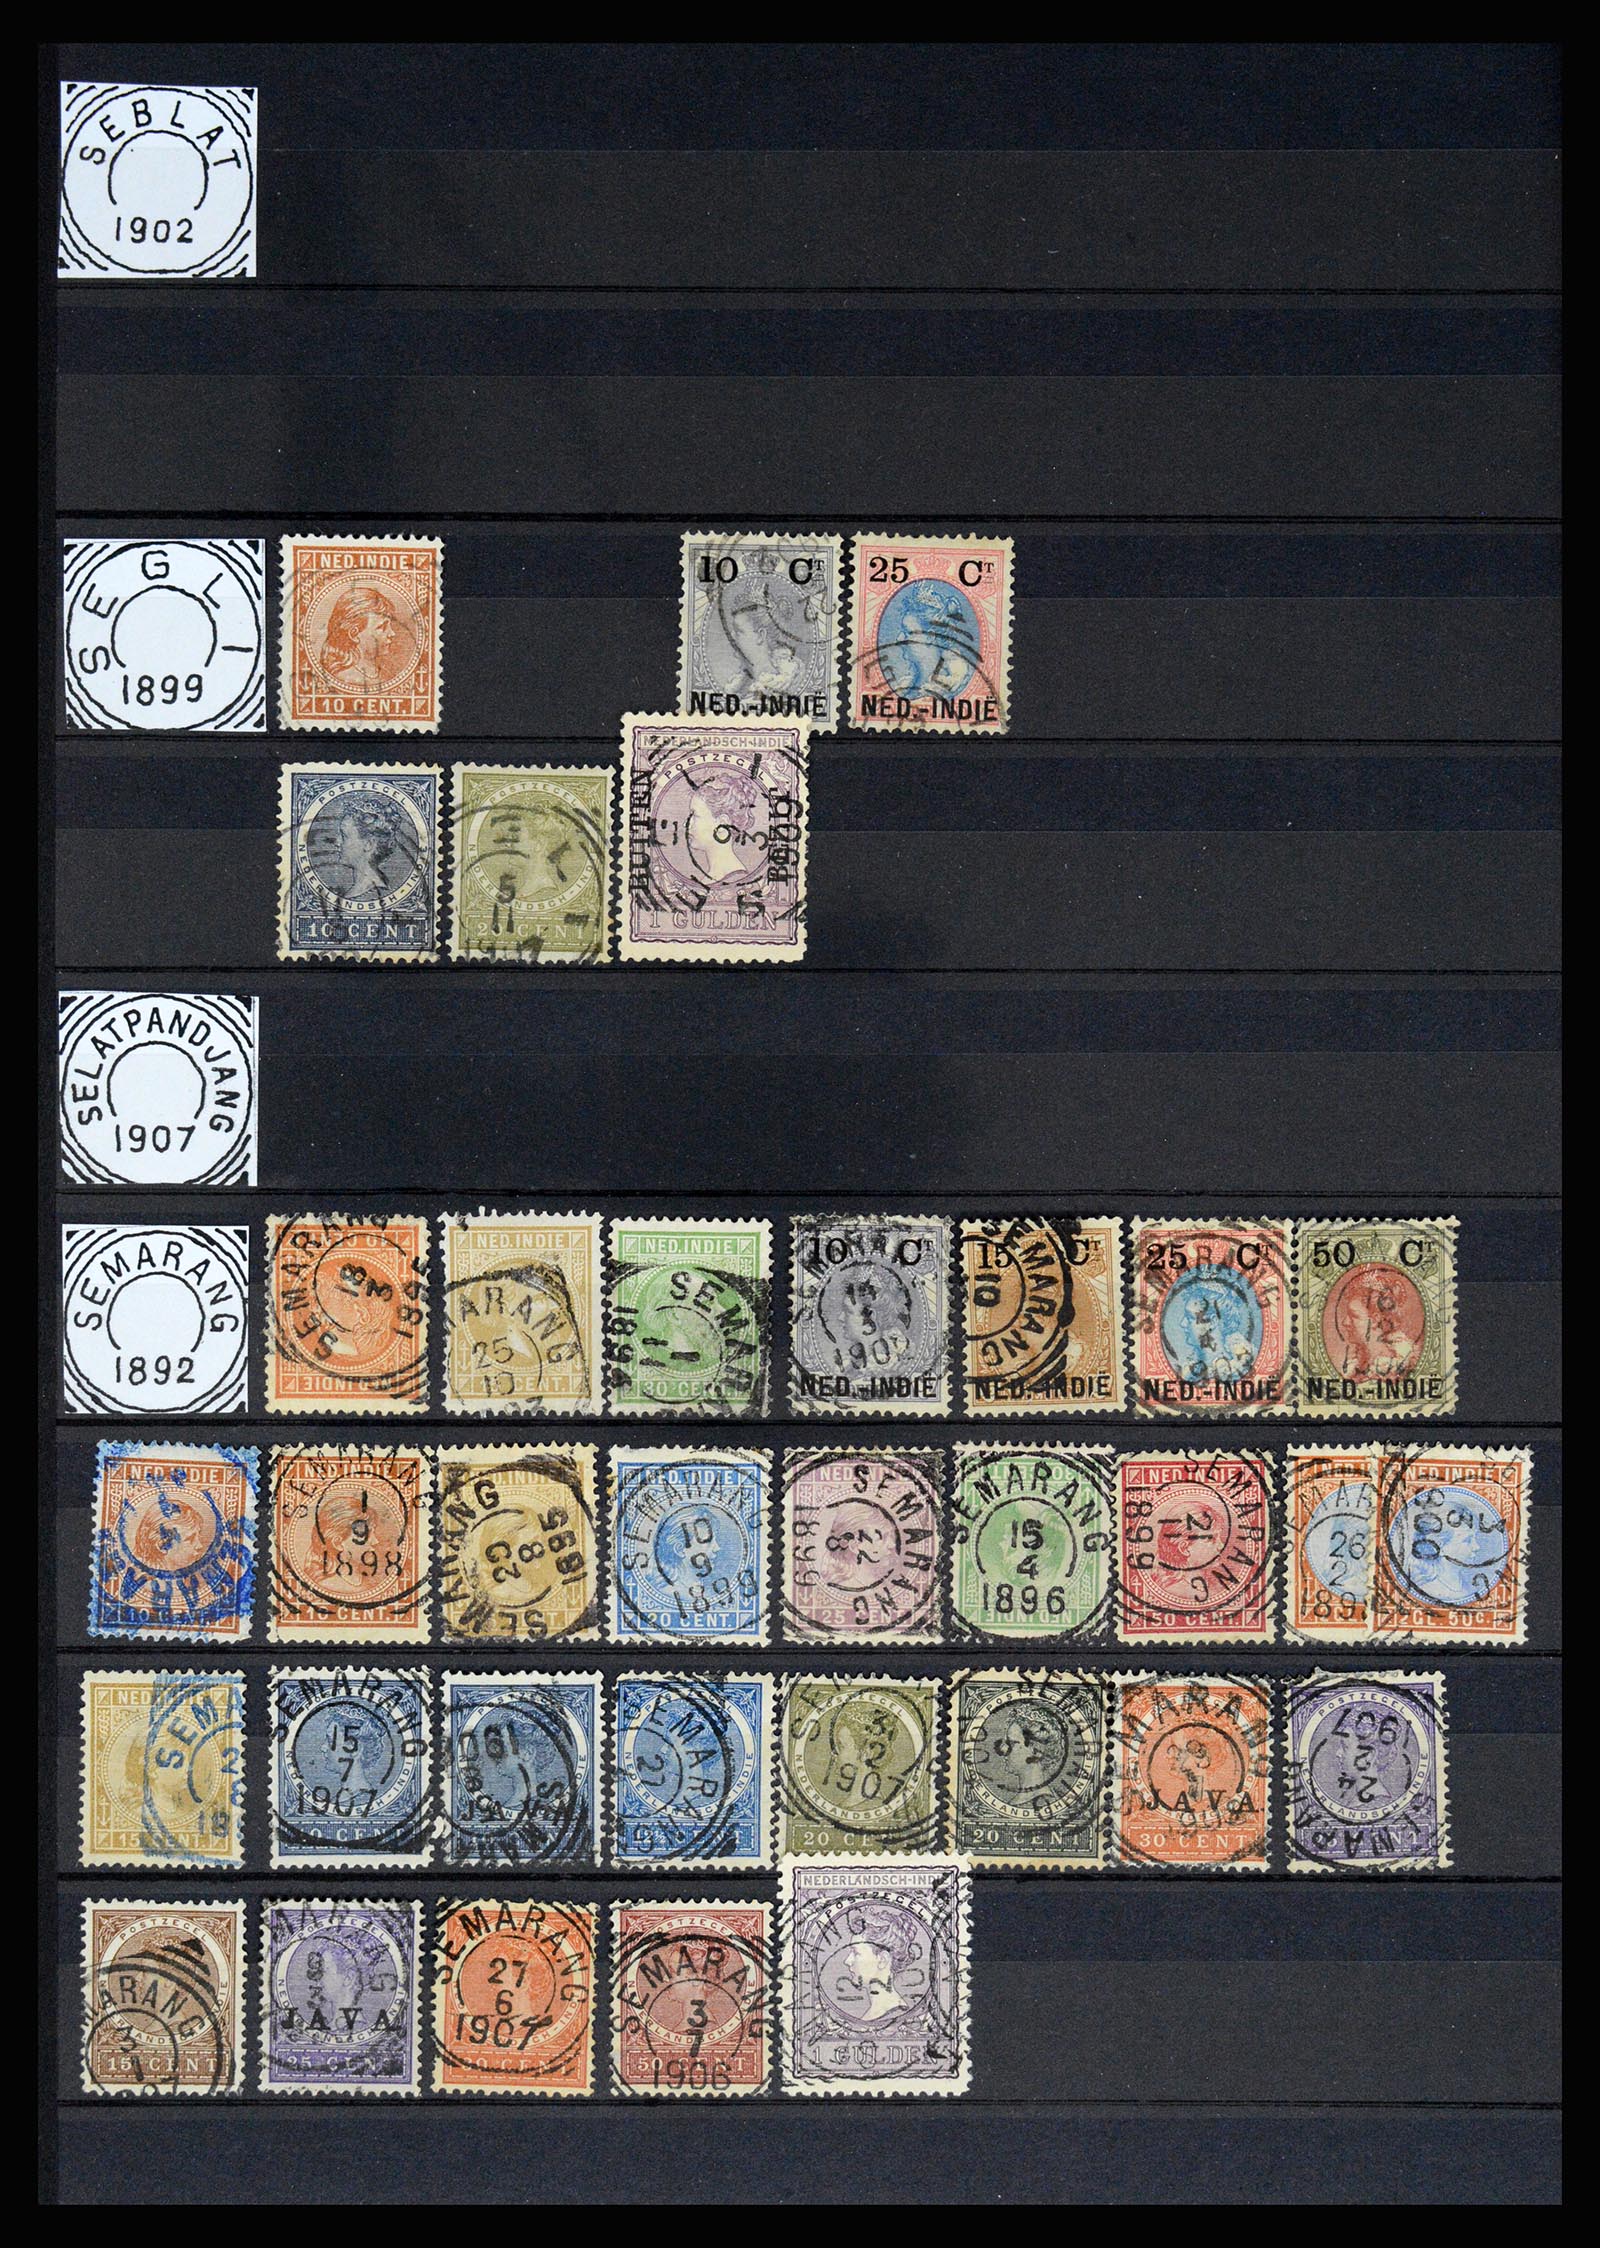 36839 045 - Stamp collection 36839 Dutch east Indies square cancels.